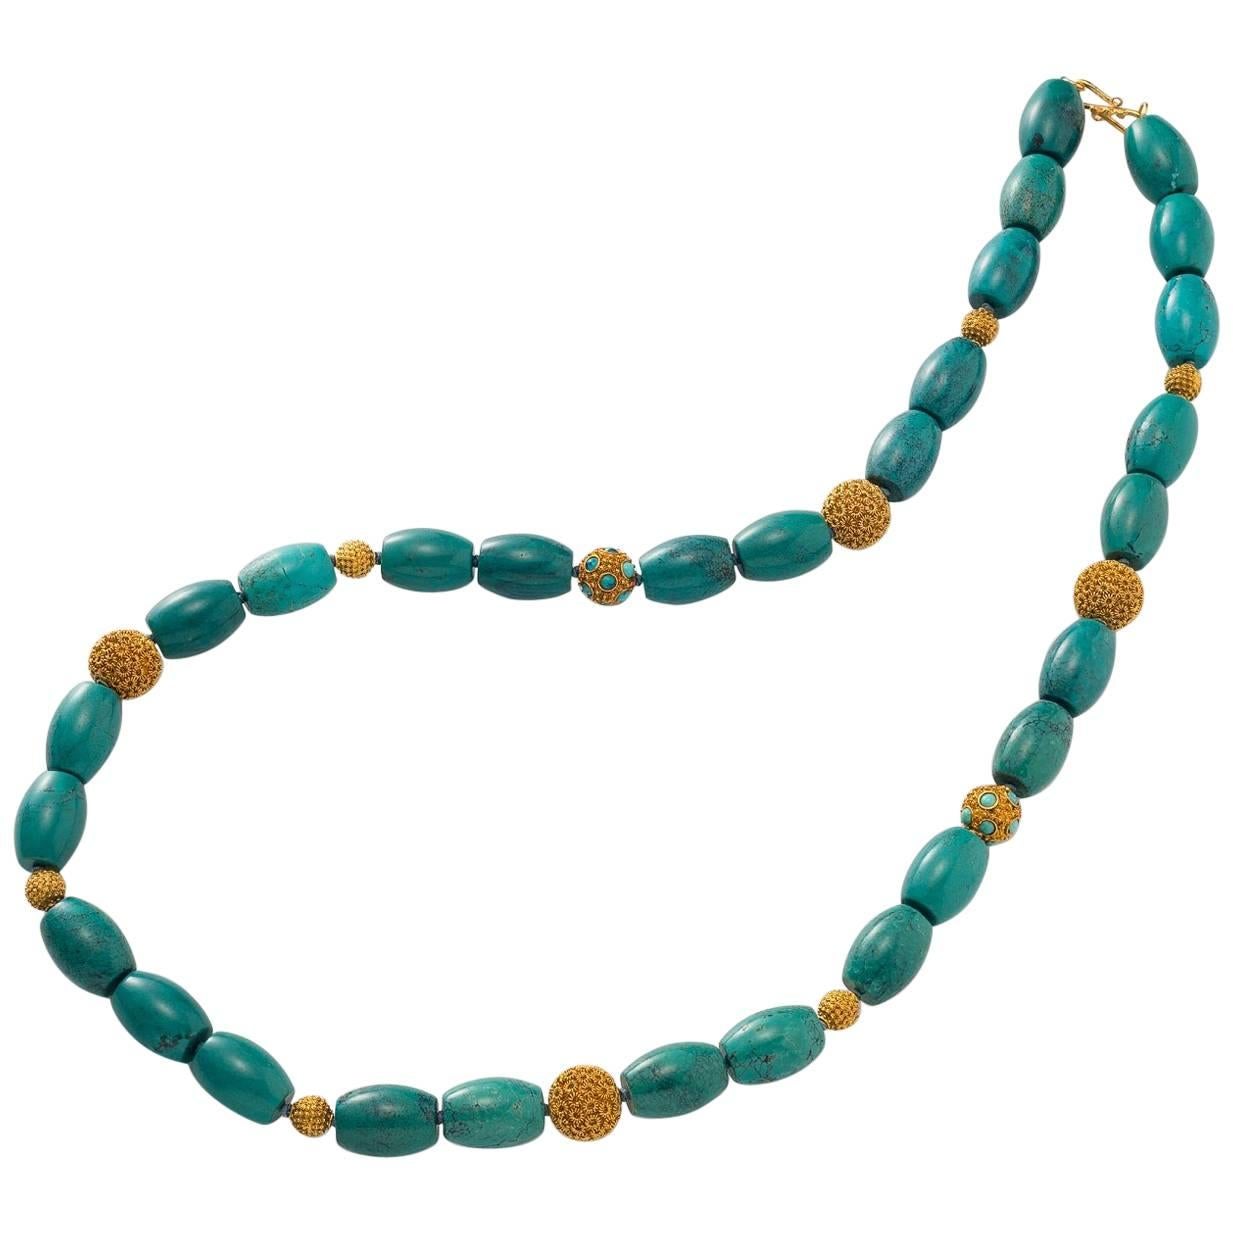 Long Necklace with Tibetan Turquoise and Vermeil Beads, Chinoiserie design